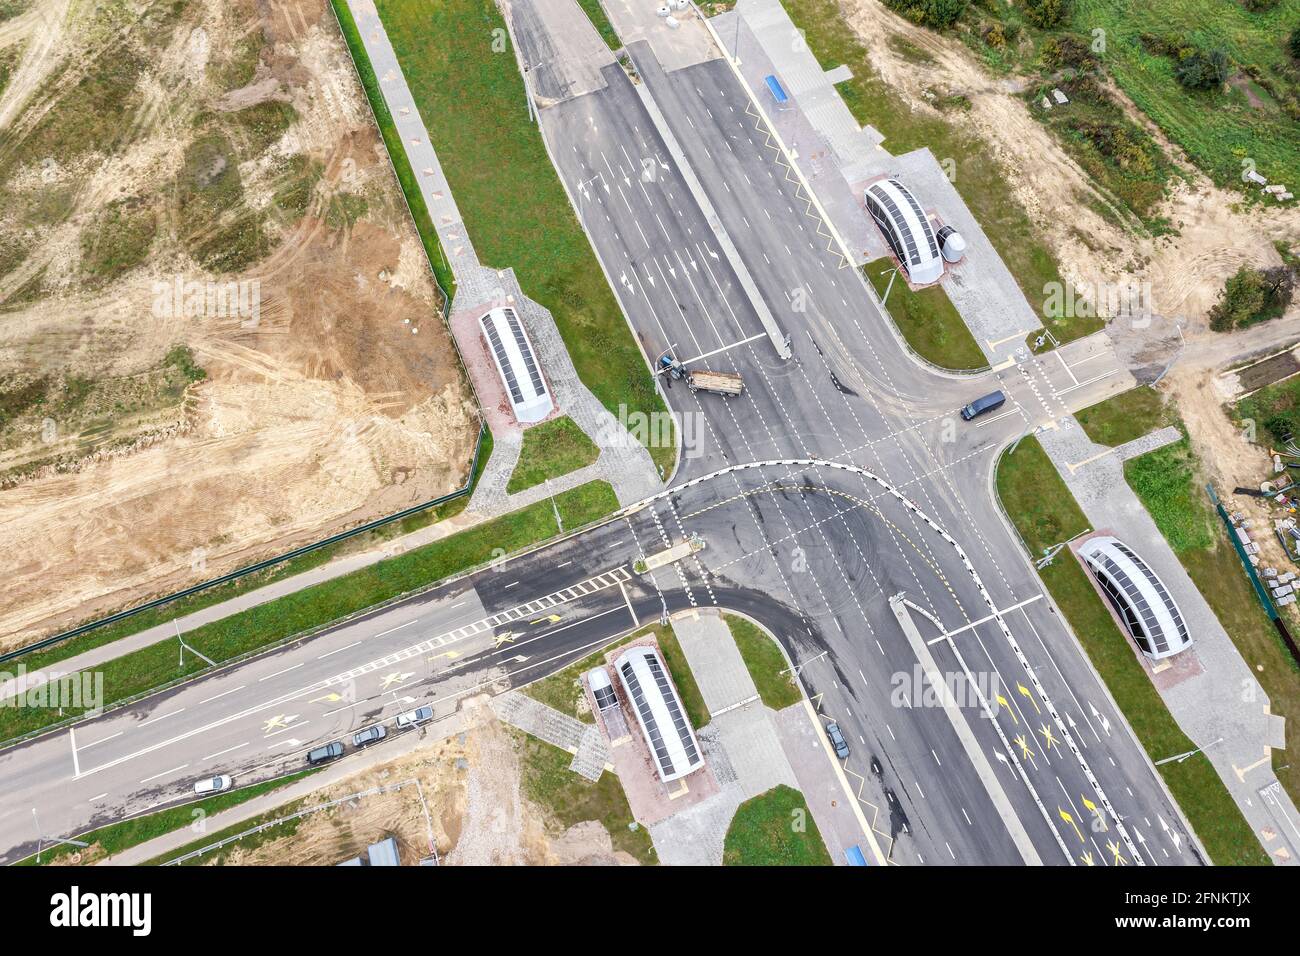 suburb crossroad under construction. road construction site. aerial view Stock Photo